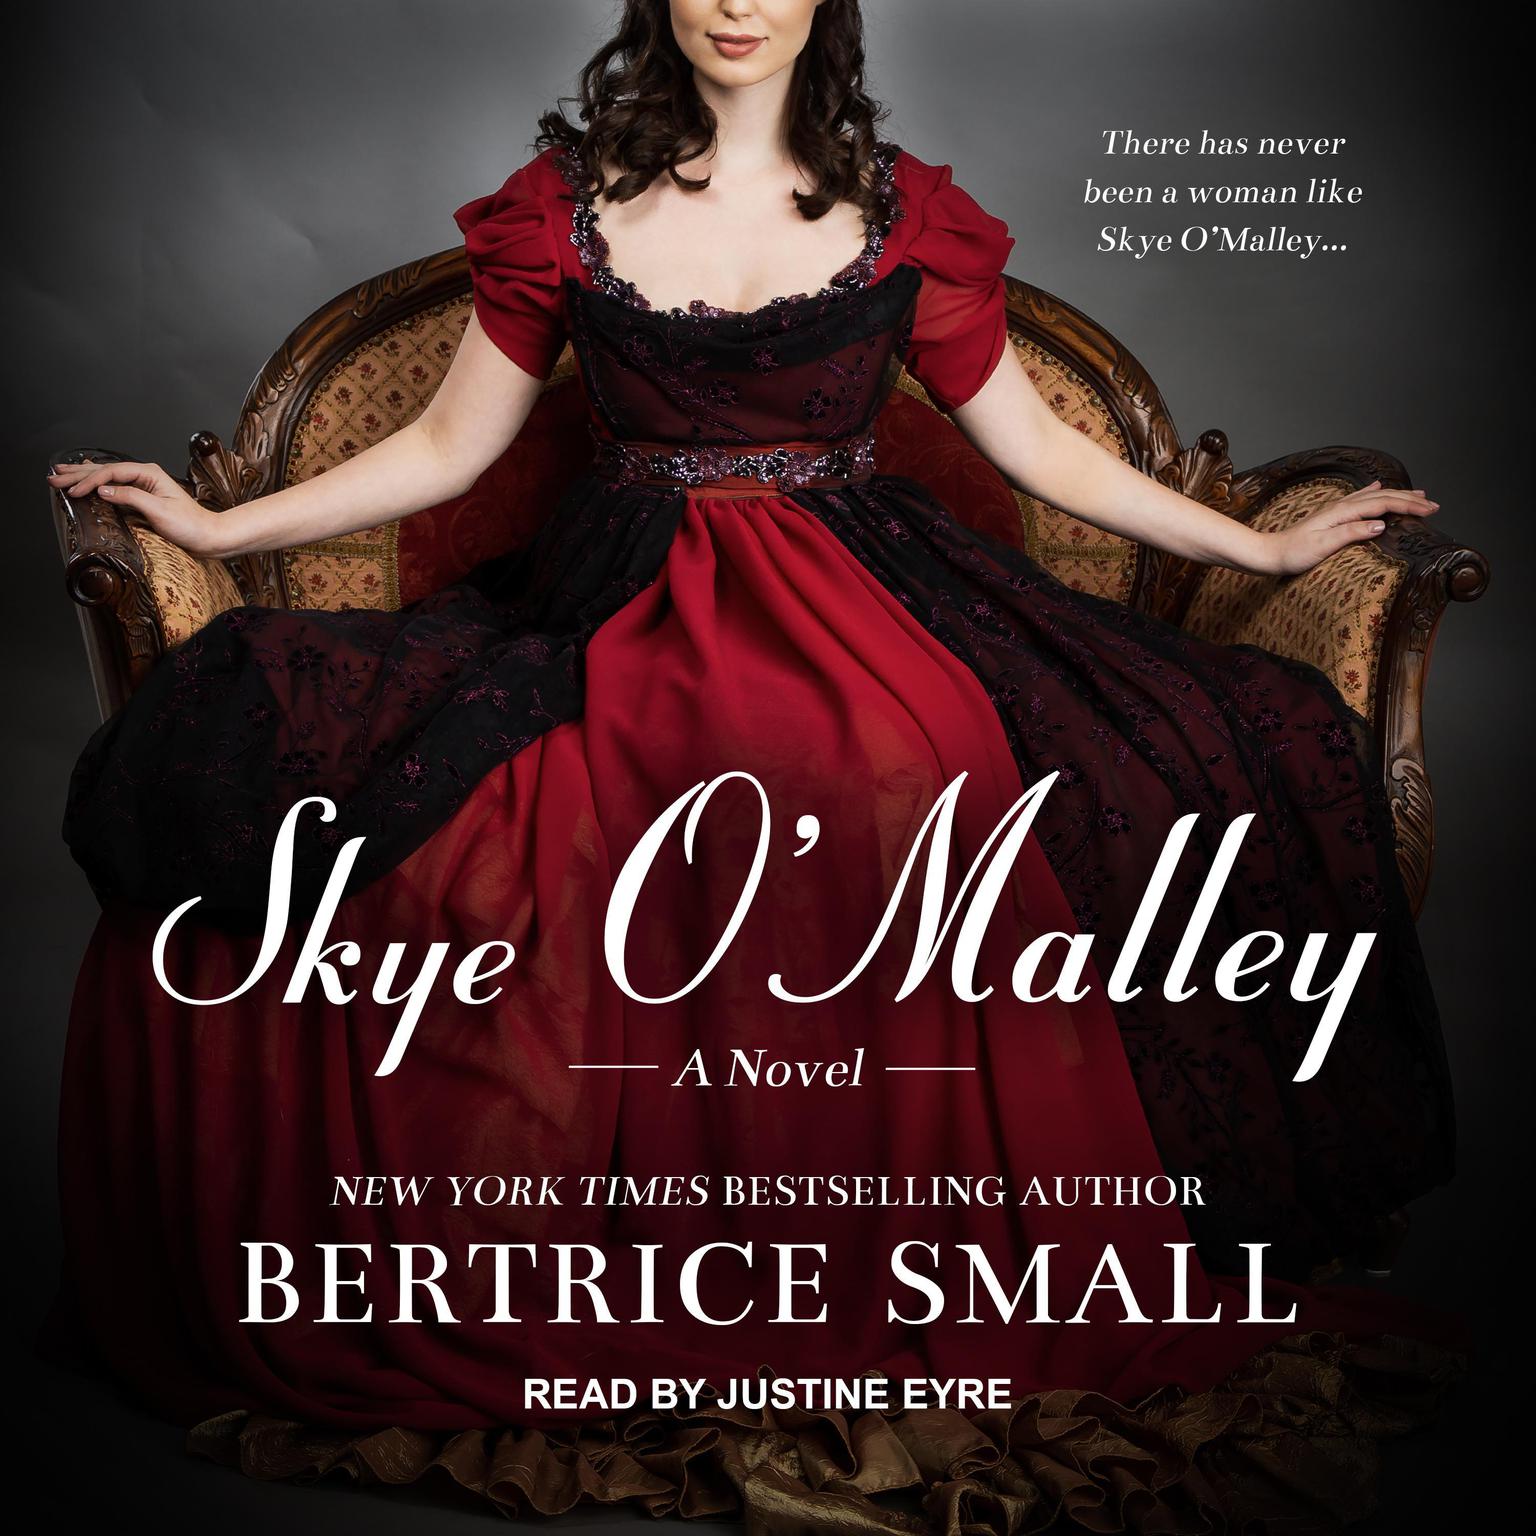 Skye OMalley: A Novel Audiobook, by Bertrice Small